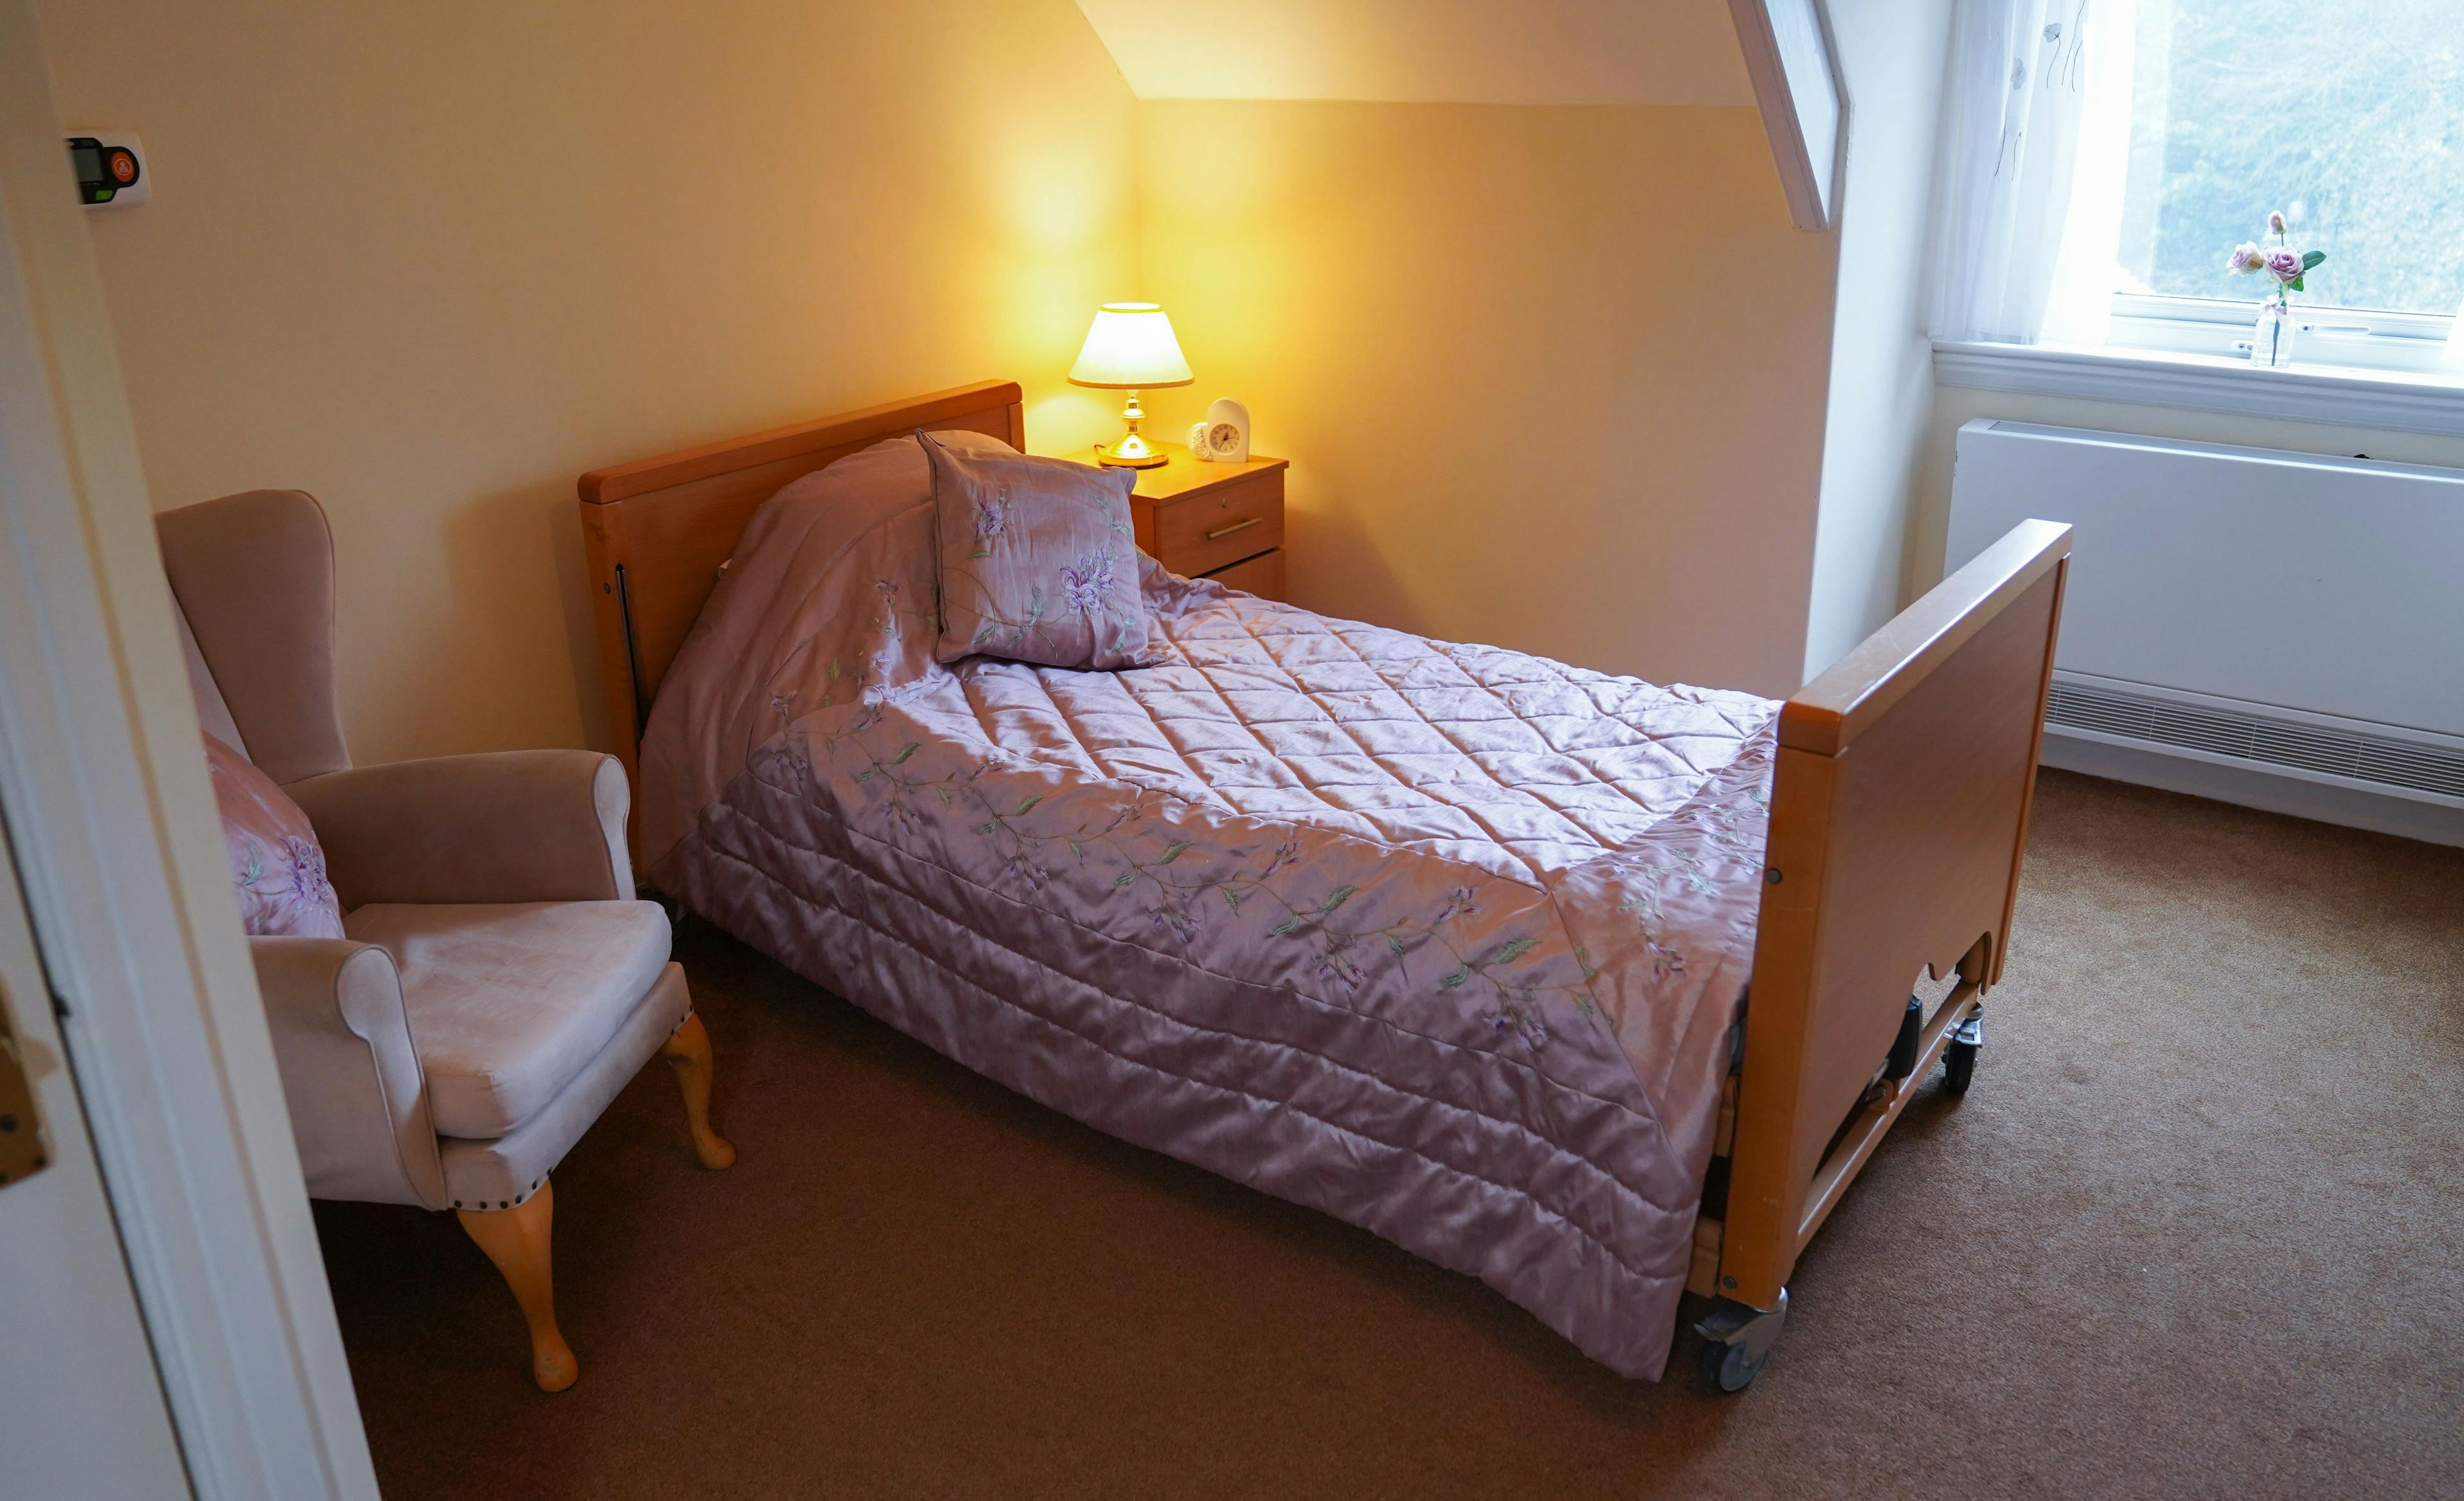 Bedroom of High Peak care home in Warrington, Cheshire